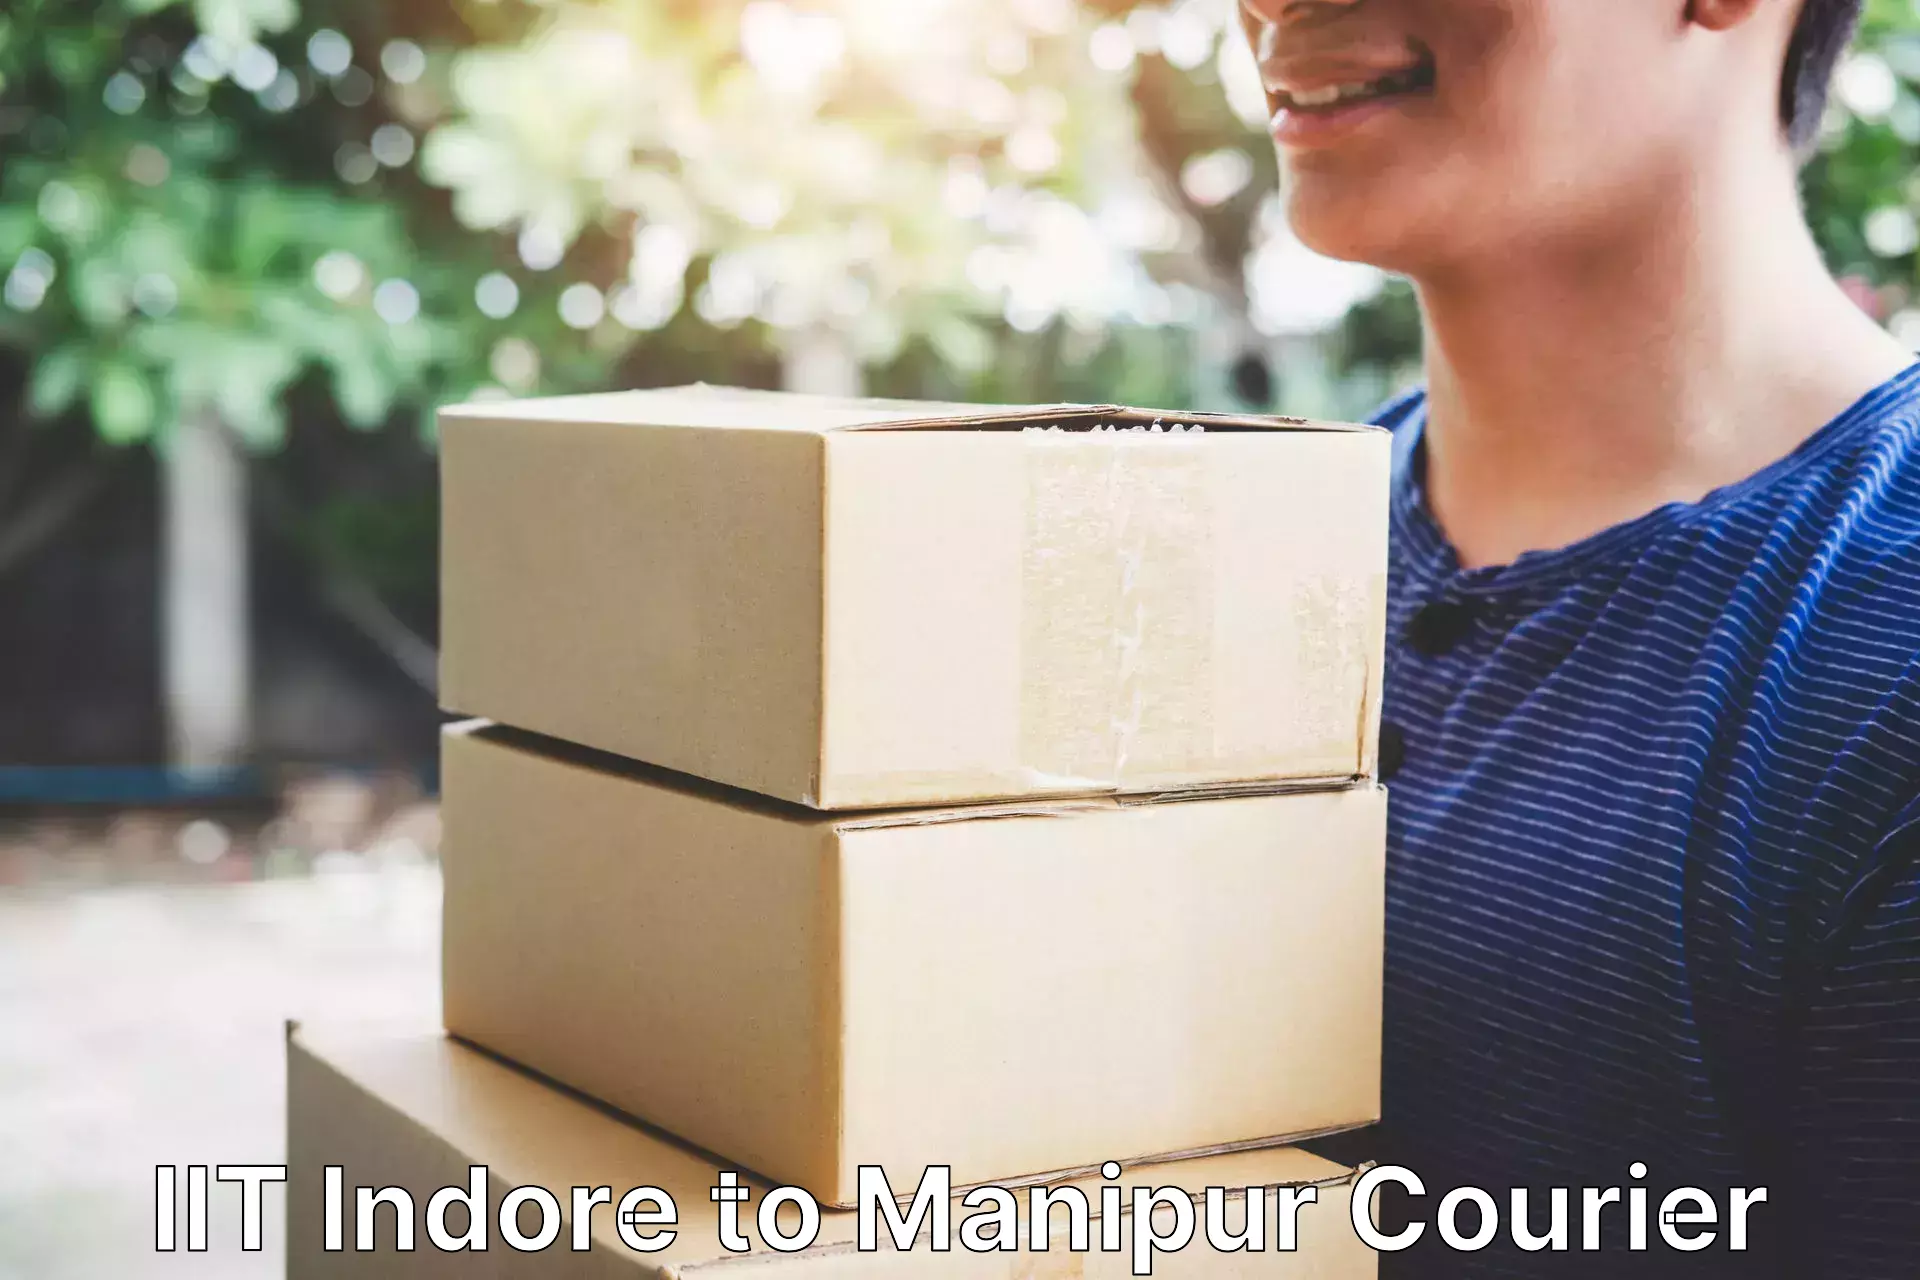 Efficient shipping platforms IIT Indore to Manipur